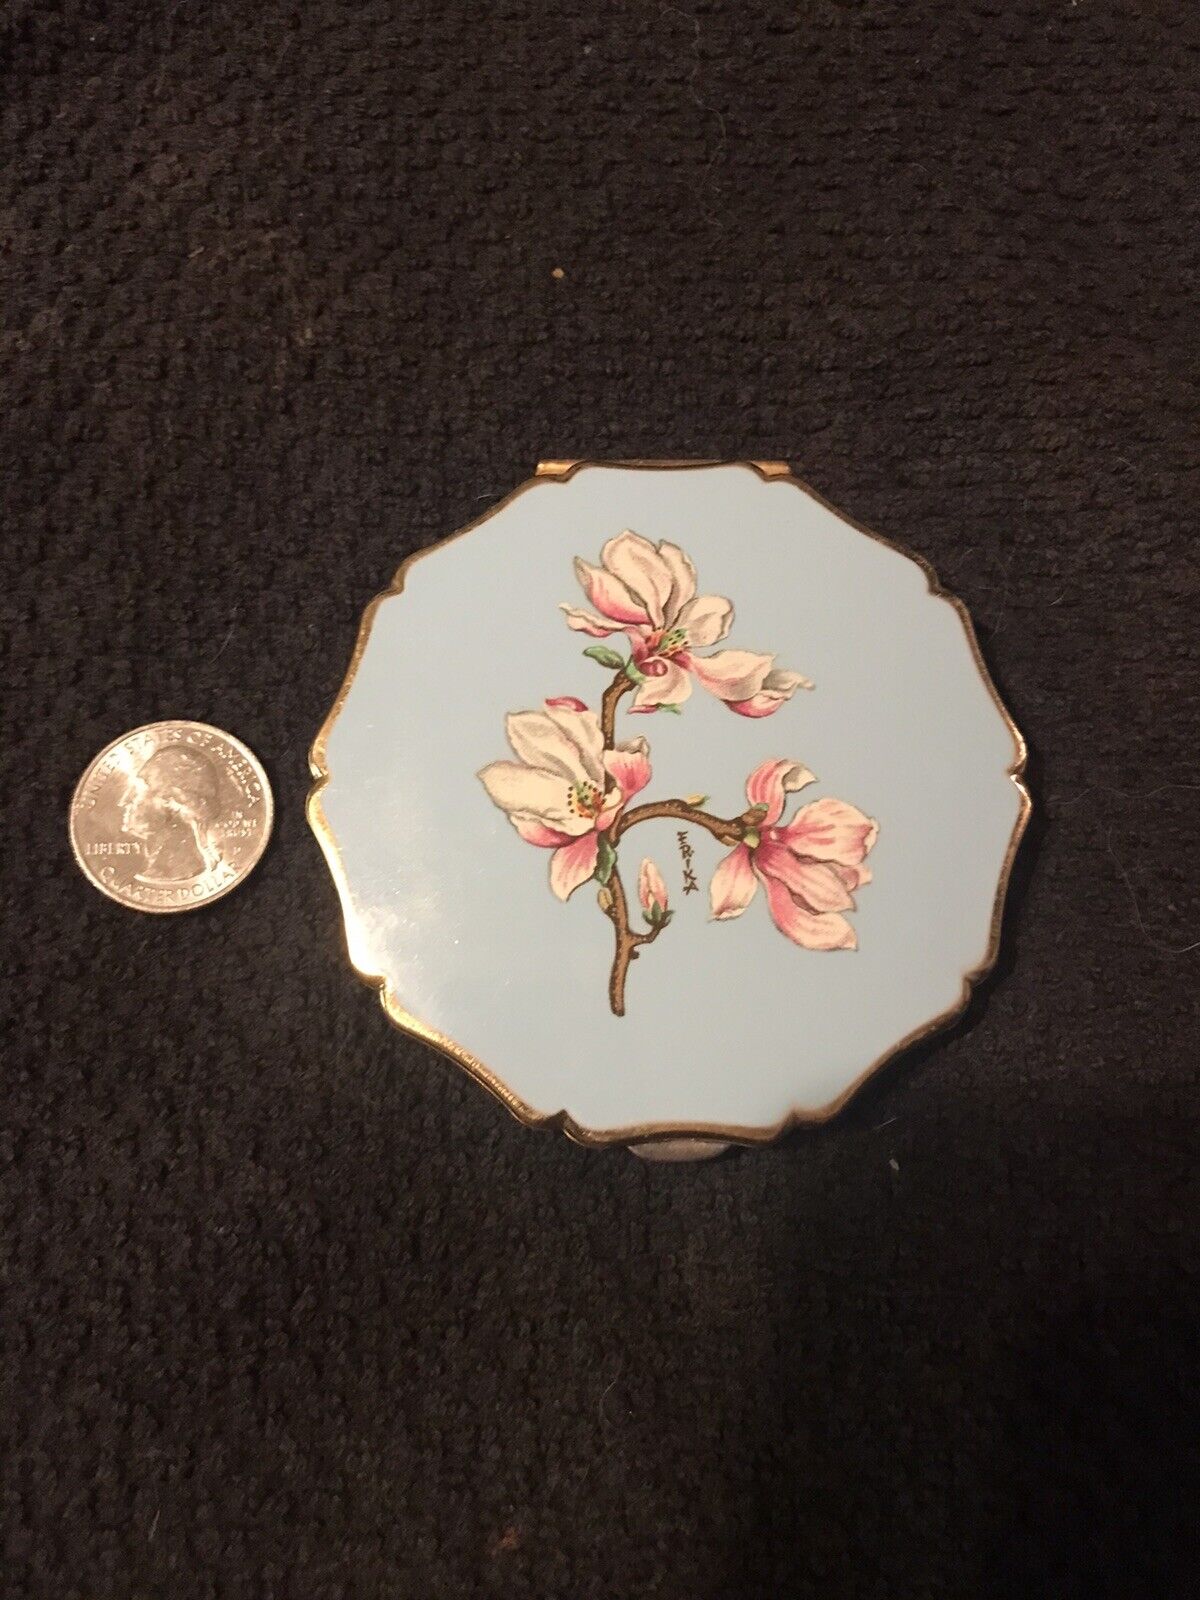 Vintage Stratton Compact Baby Blue Flowers England